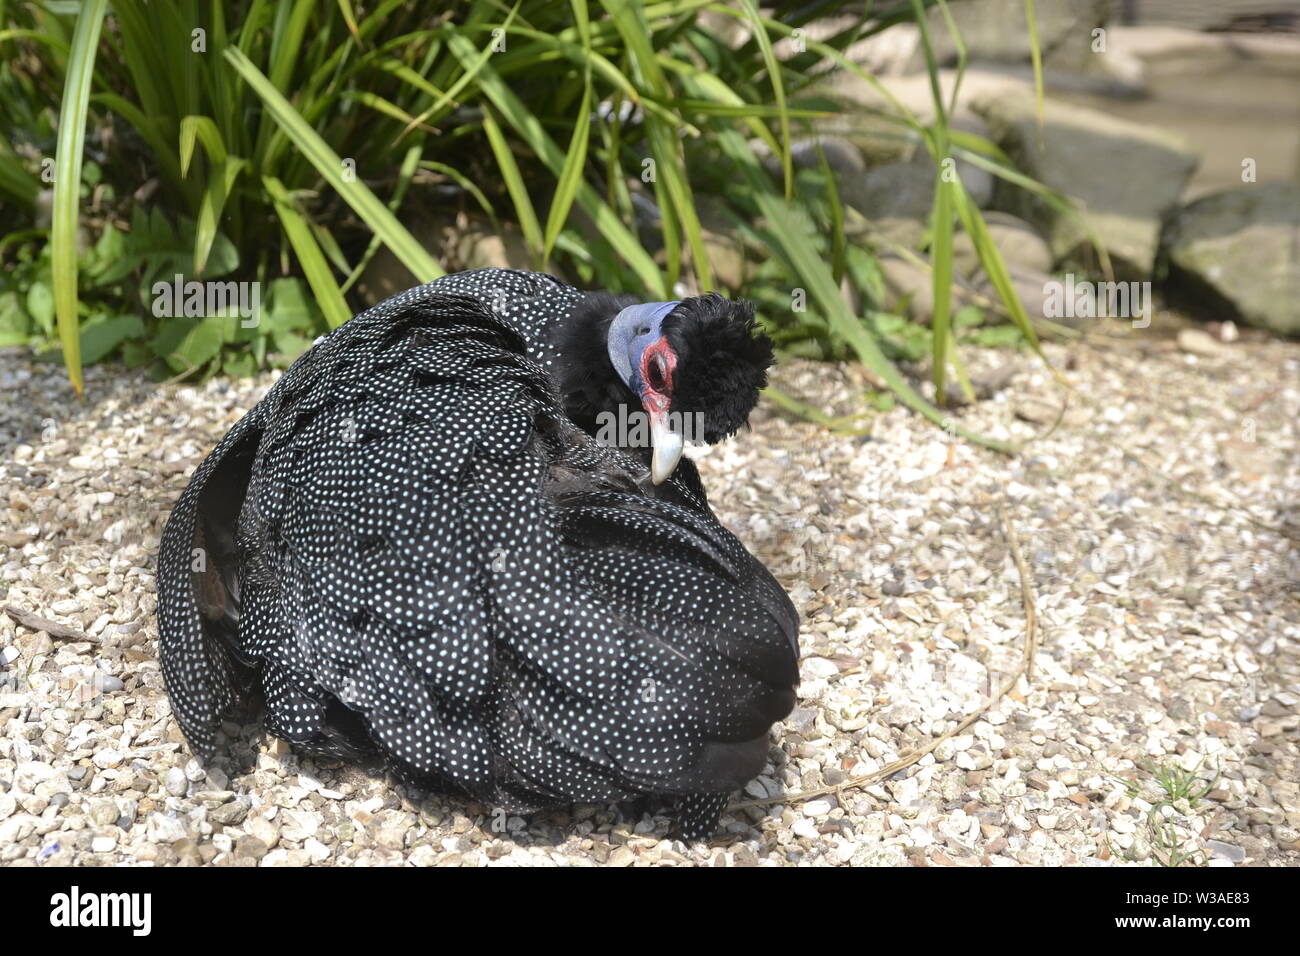 Kenyan / African Crested Guineafowl at Birdland Park and Gardens in Bourton-on-the-Water, Gloucestershire, UK Stock Photo